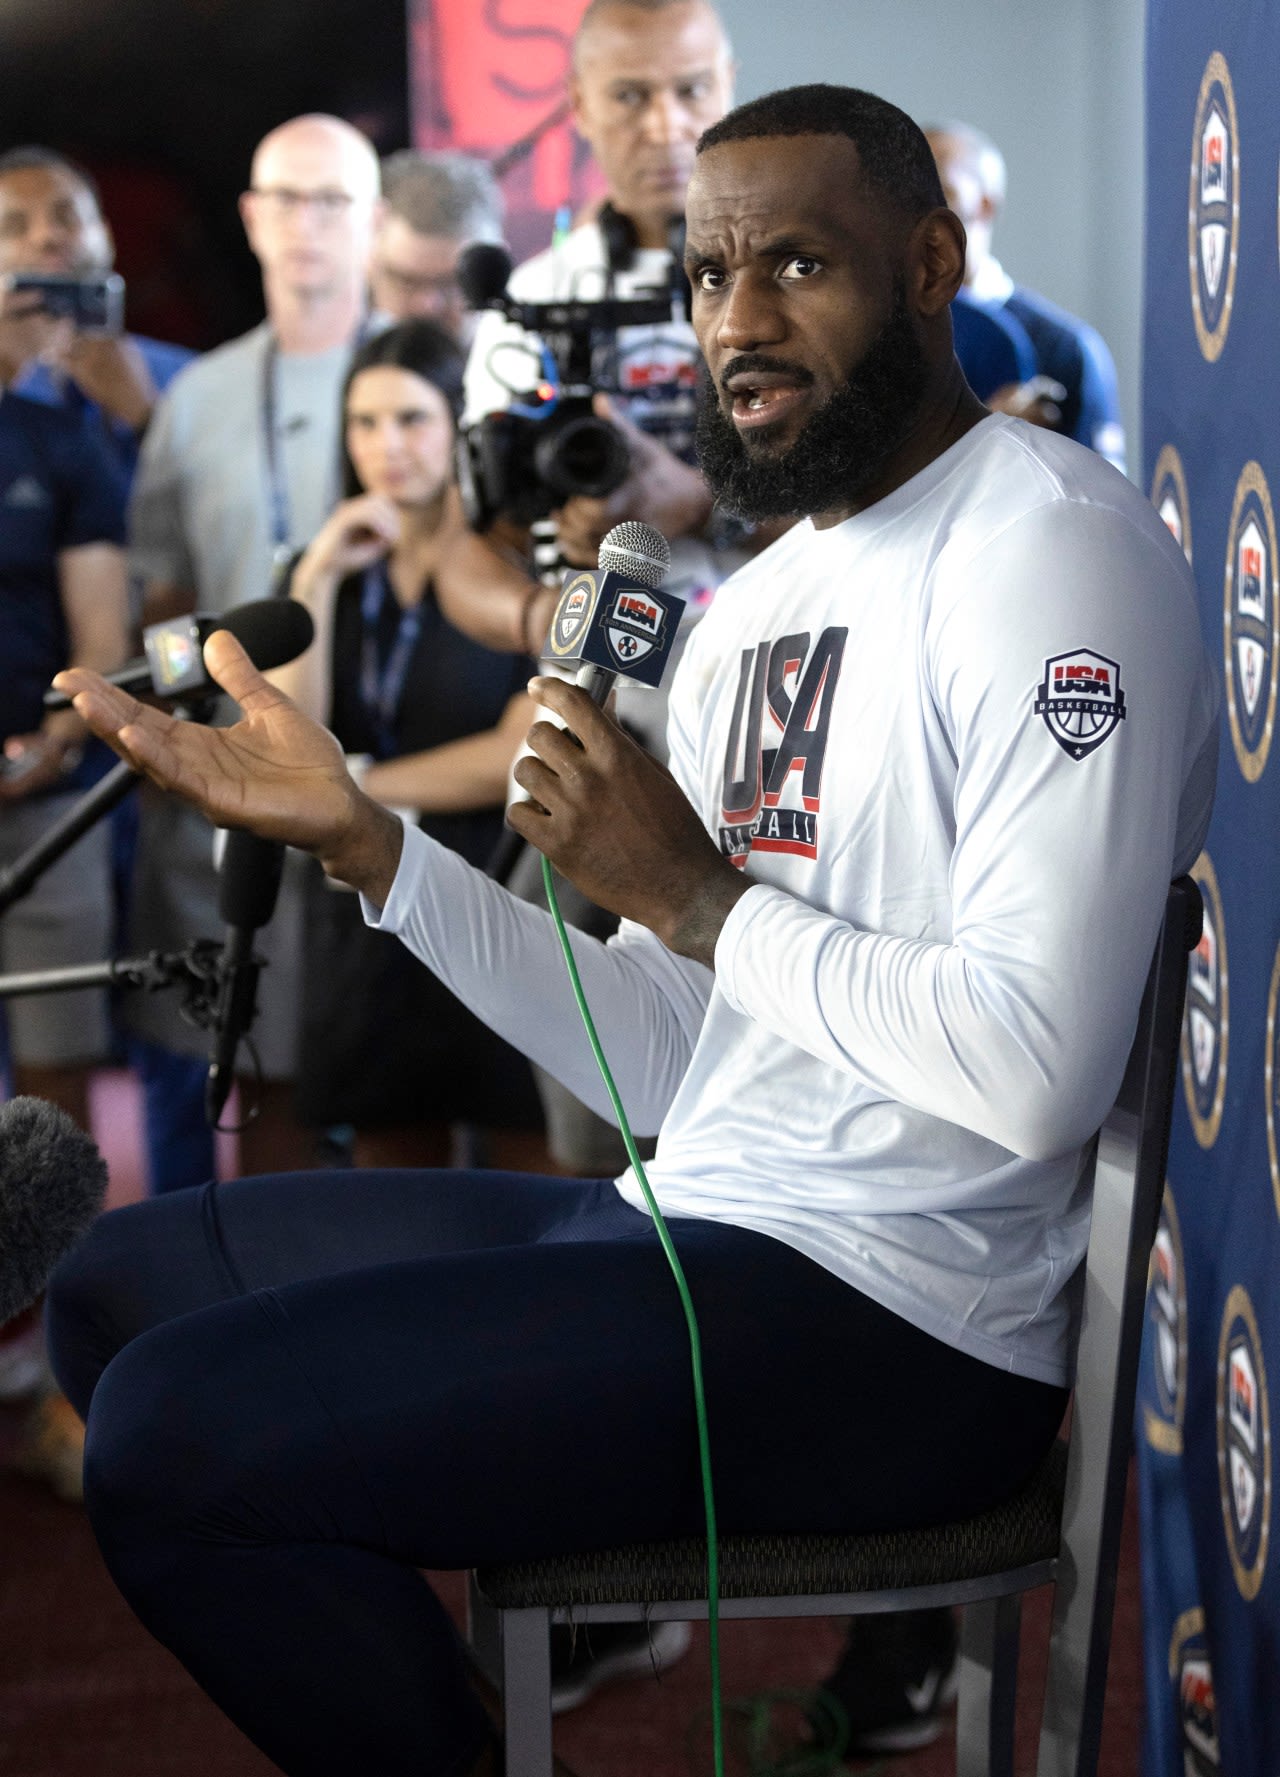 Back for a 4th Olympics run, LeBron James says gold is all that matters